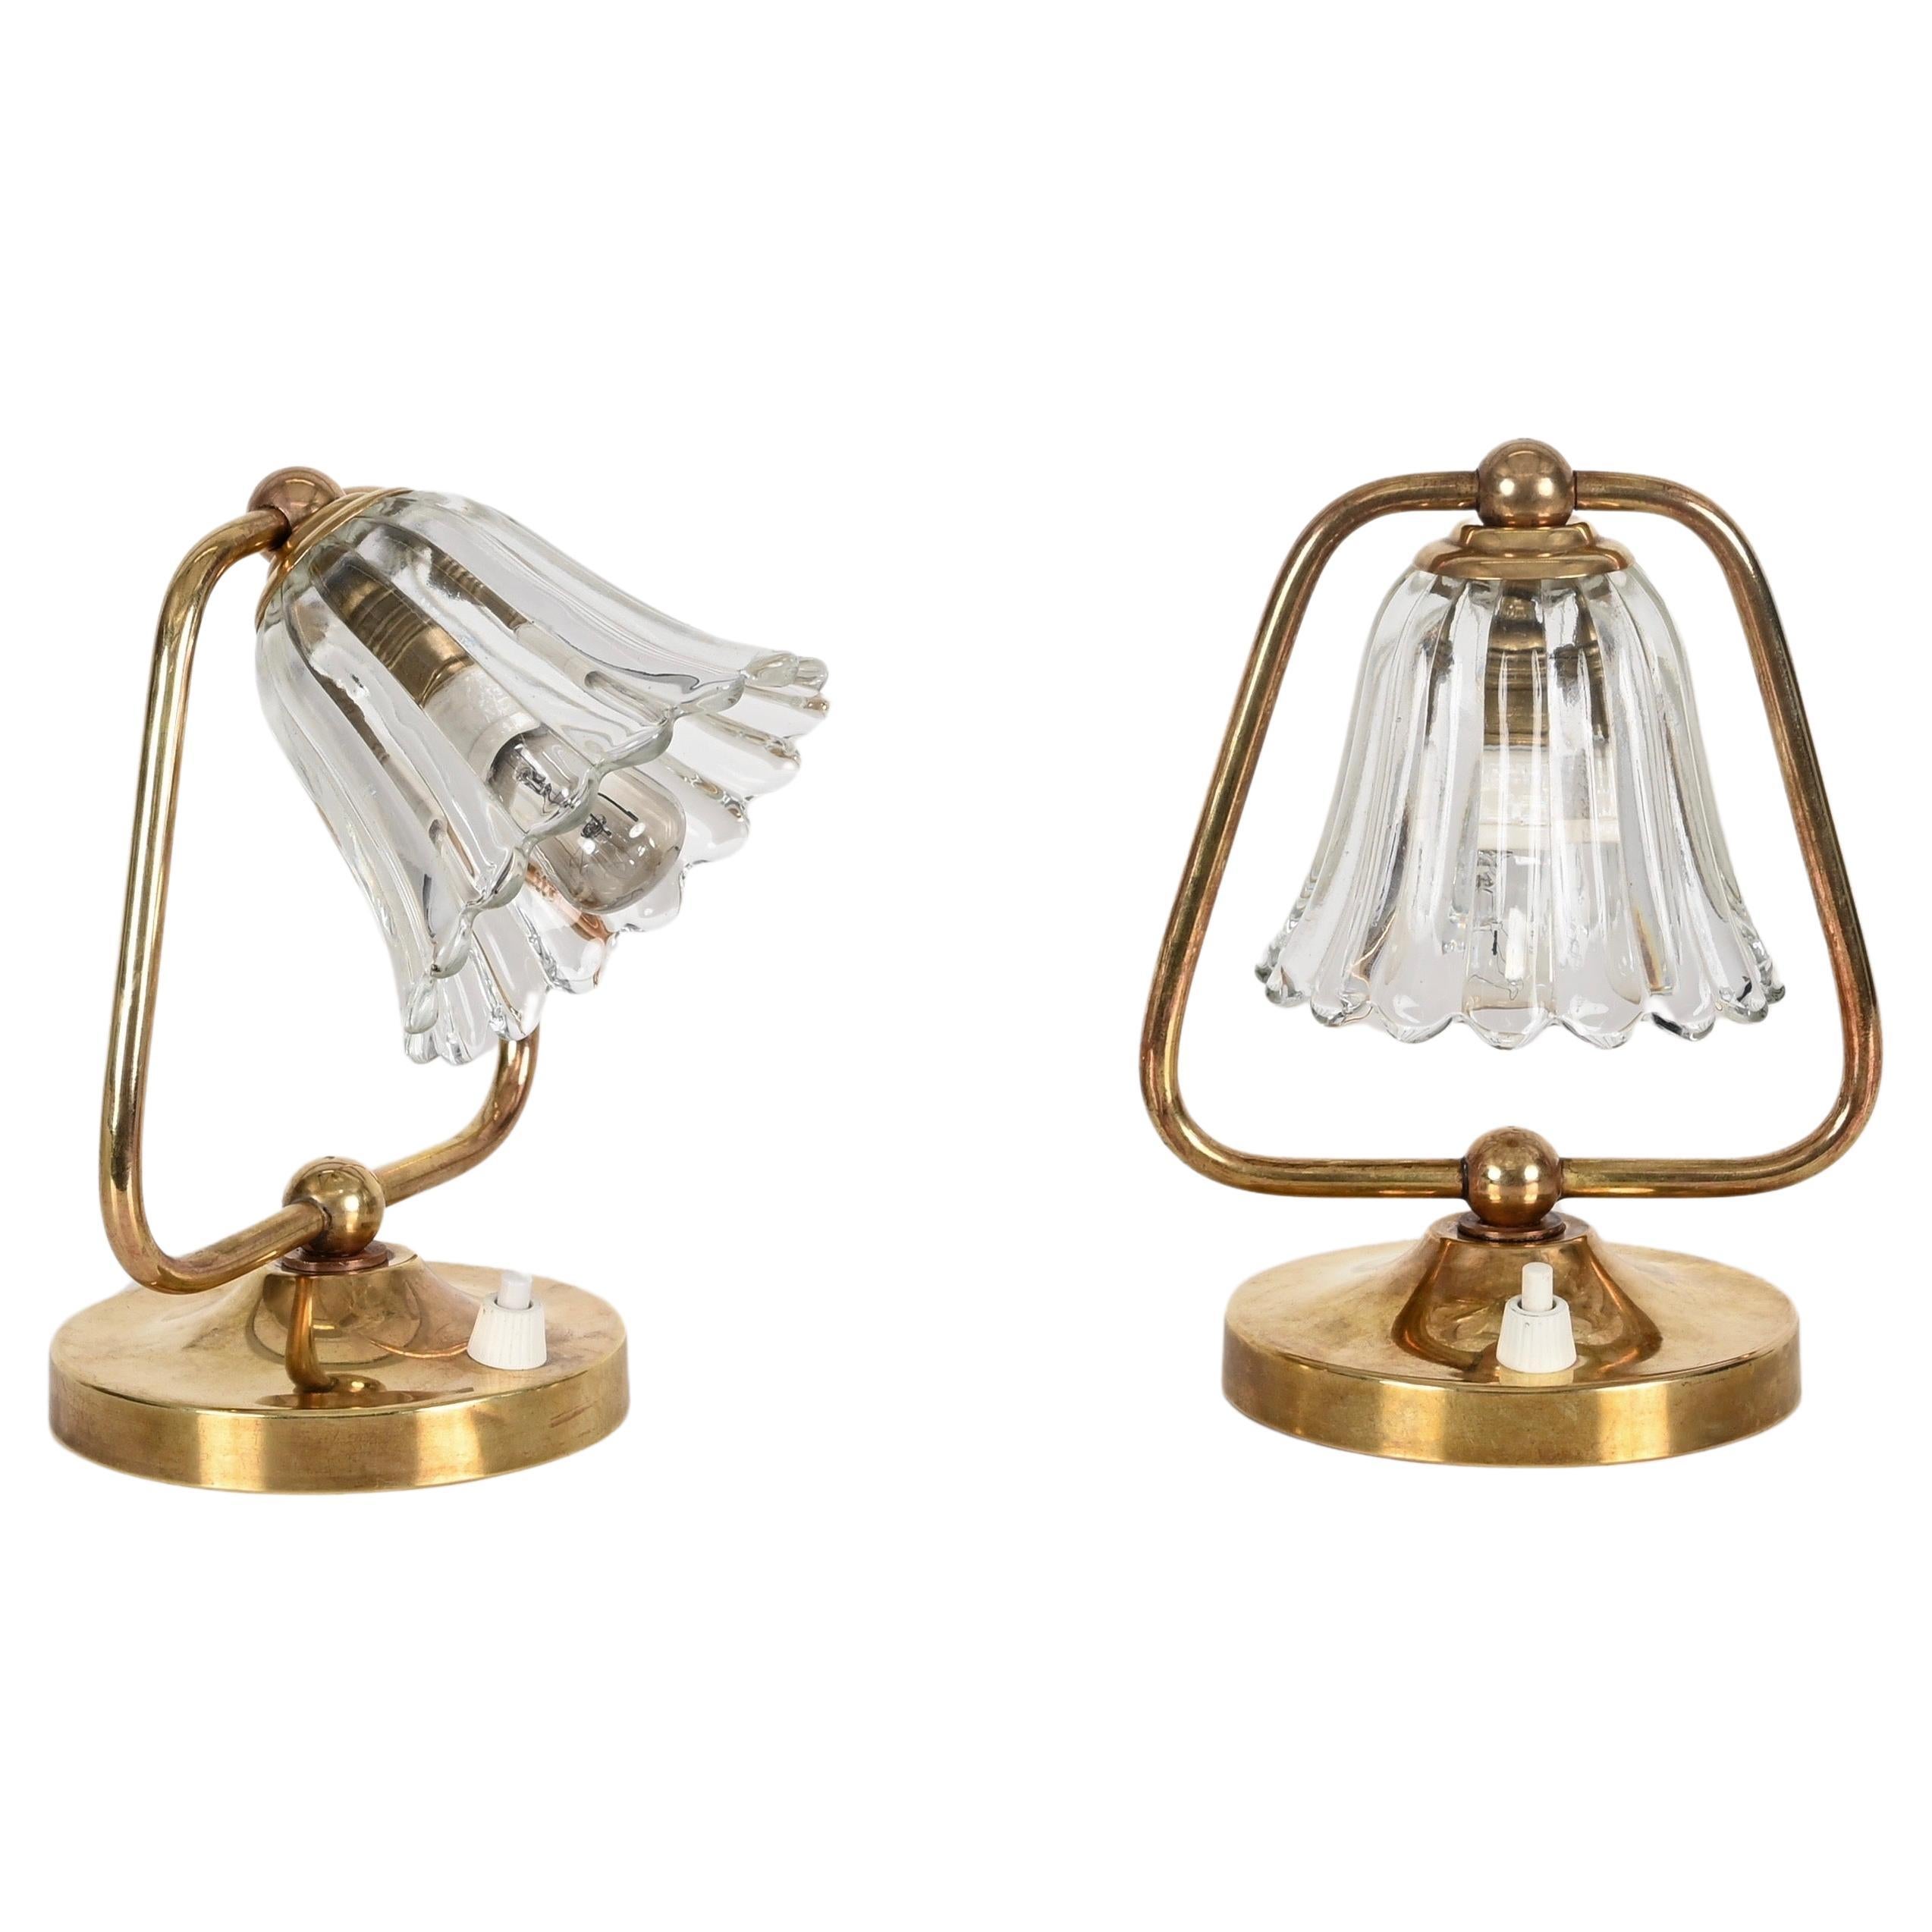 Pair of Murano Glass and Brass Bell Table Lamps by Barovier, Italy, 1940s